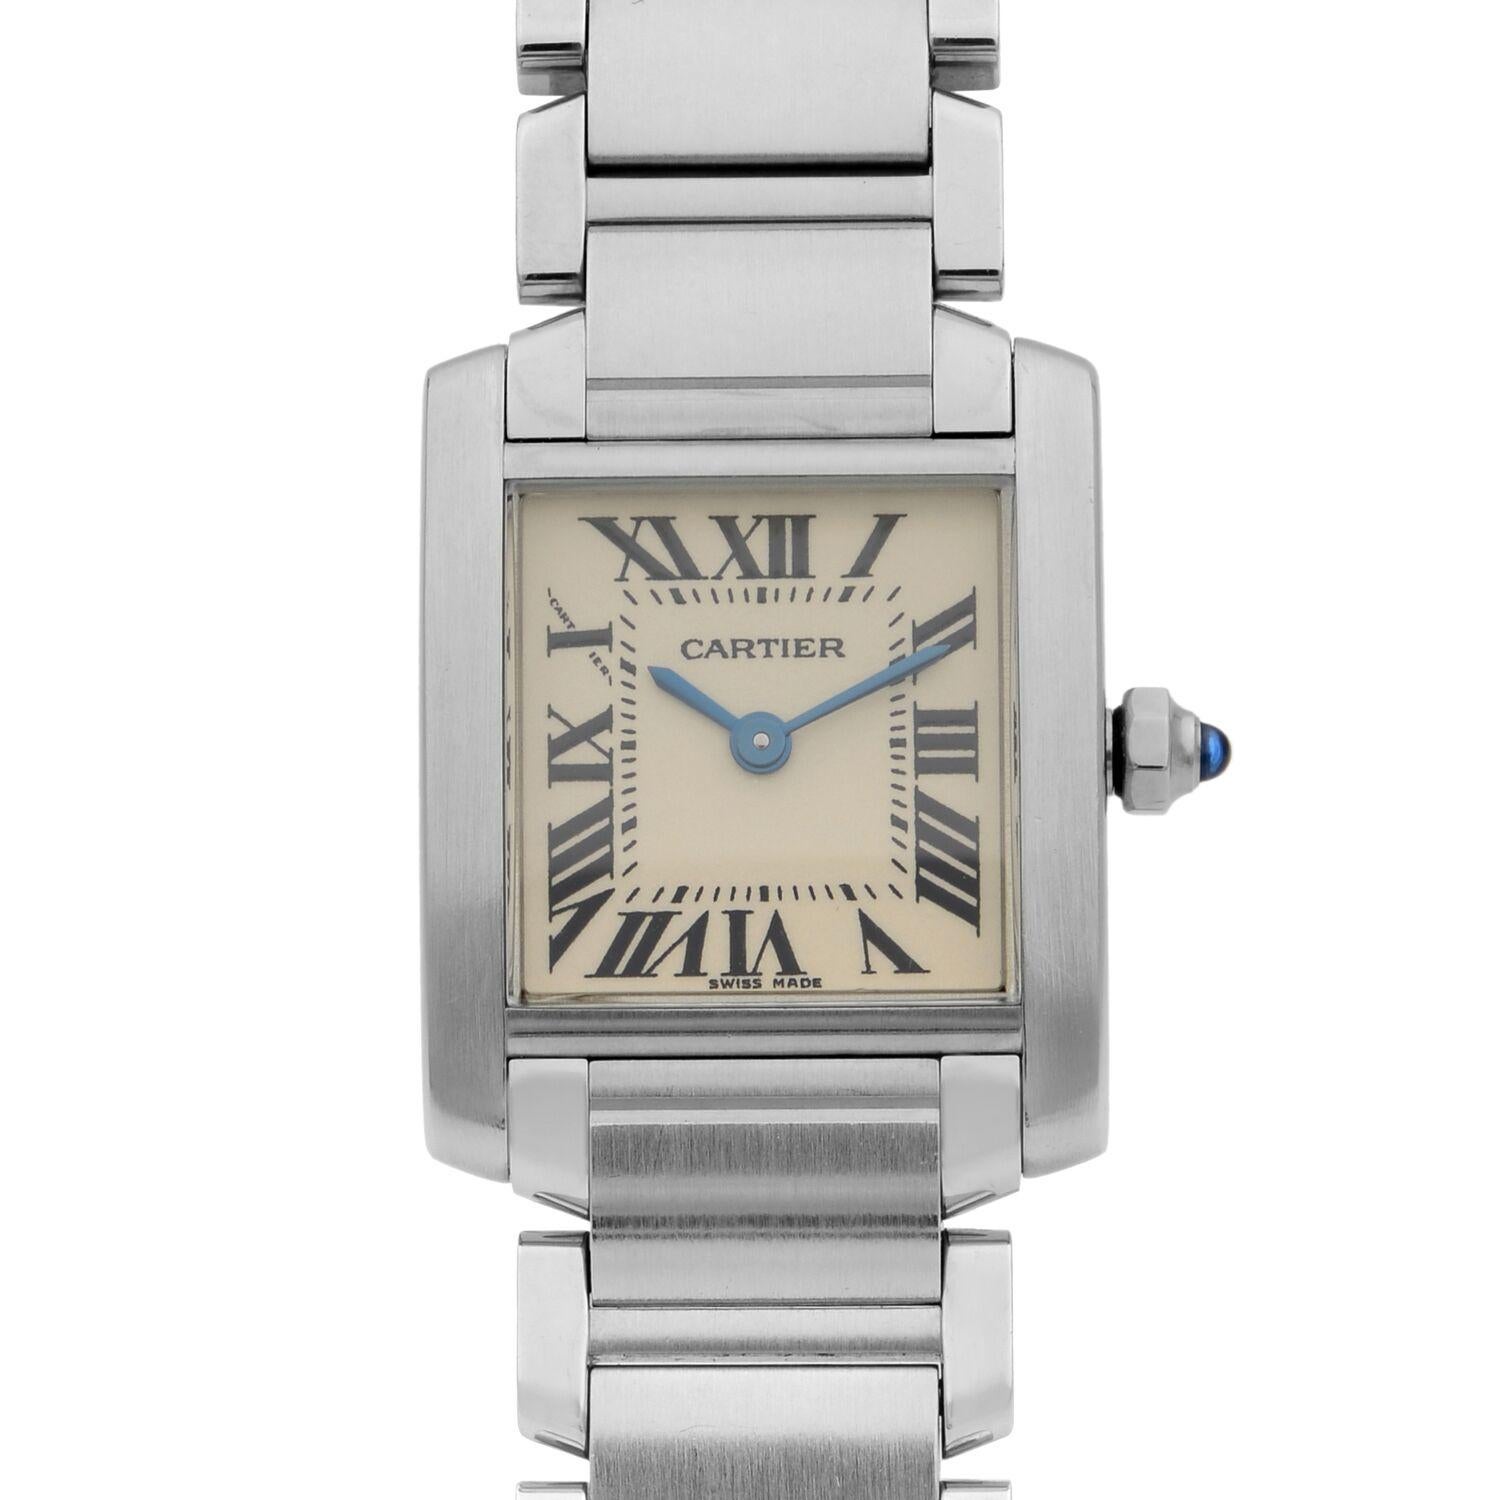 This pre-owned Cartier Tank W51008Q3 is a beautiful Womens timepiece that is powered by a quartz movement which is cased in a stainless steel case. It has a square shape face,  dial and has hand roman numerals style markers. It is completed with a